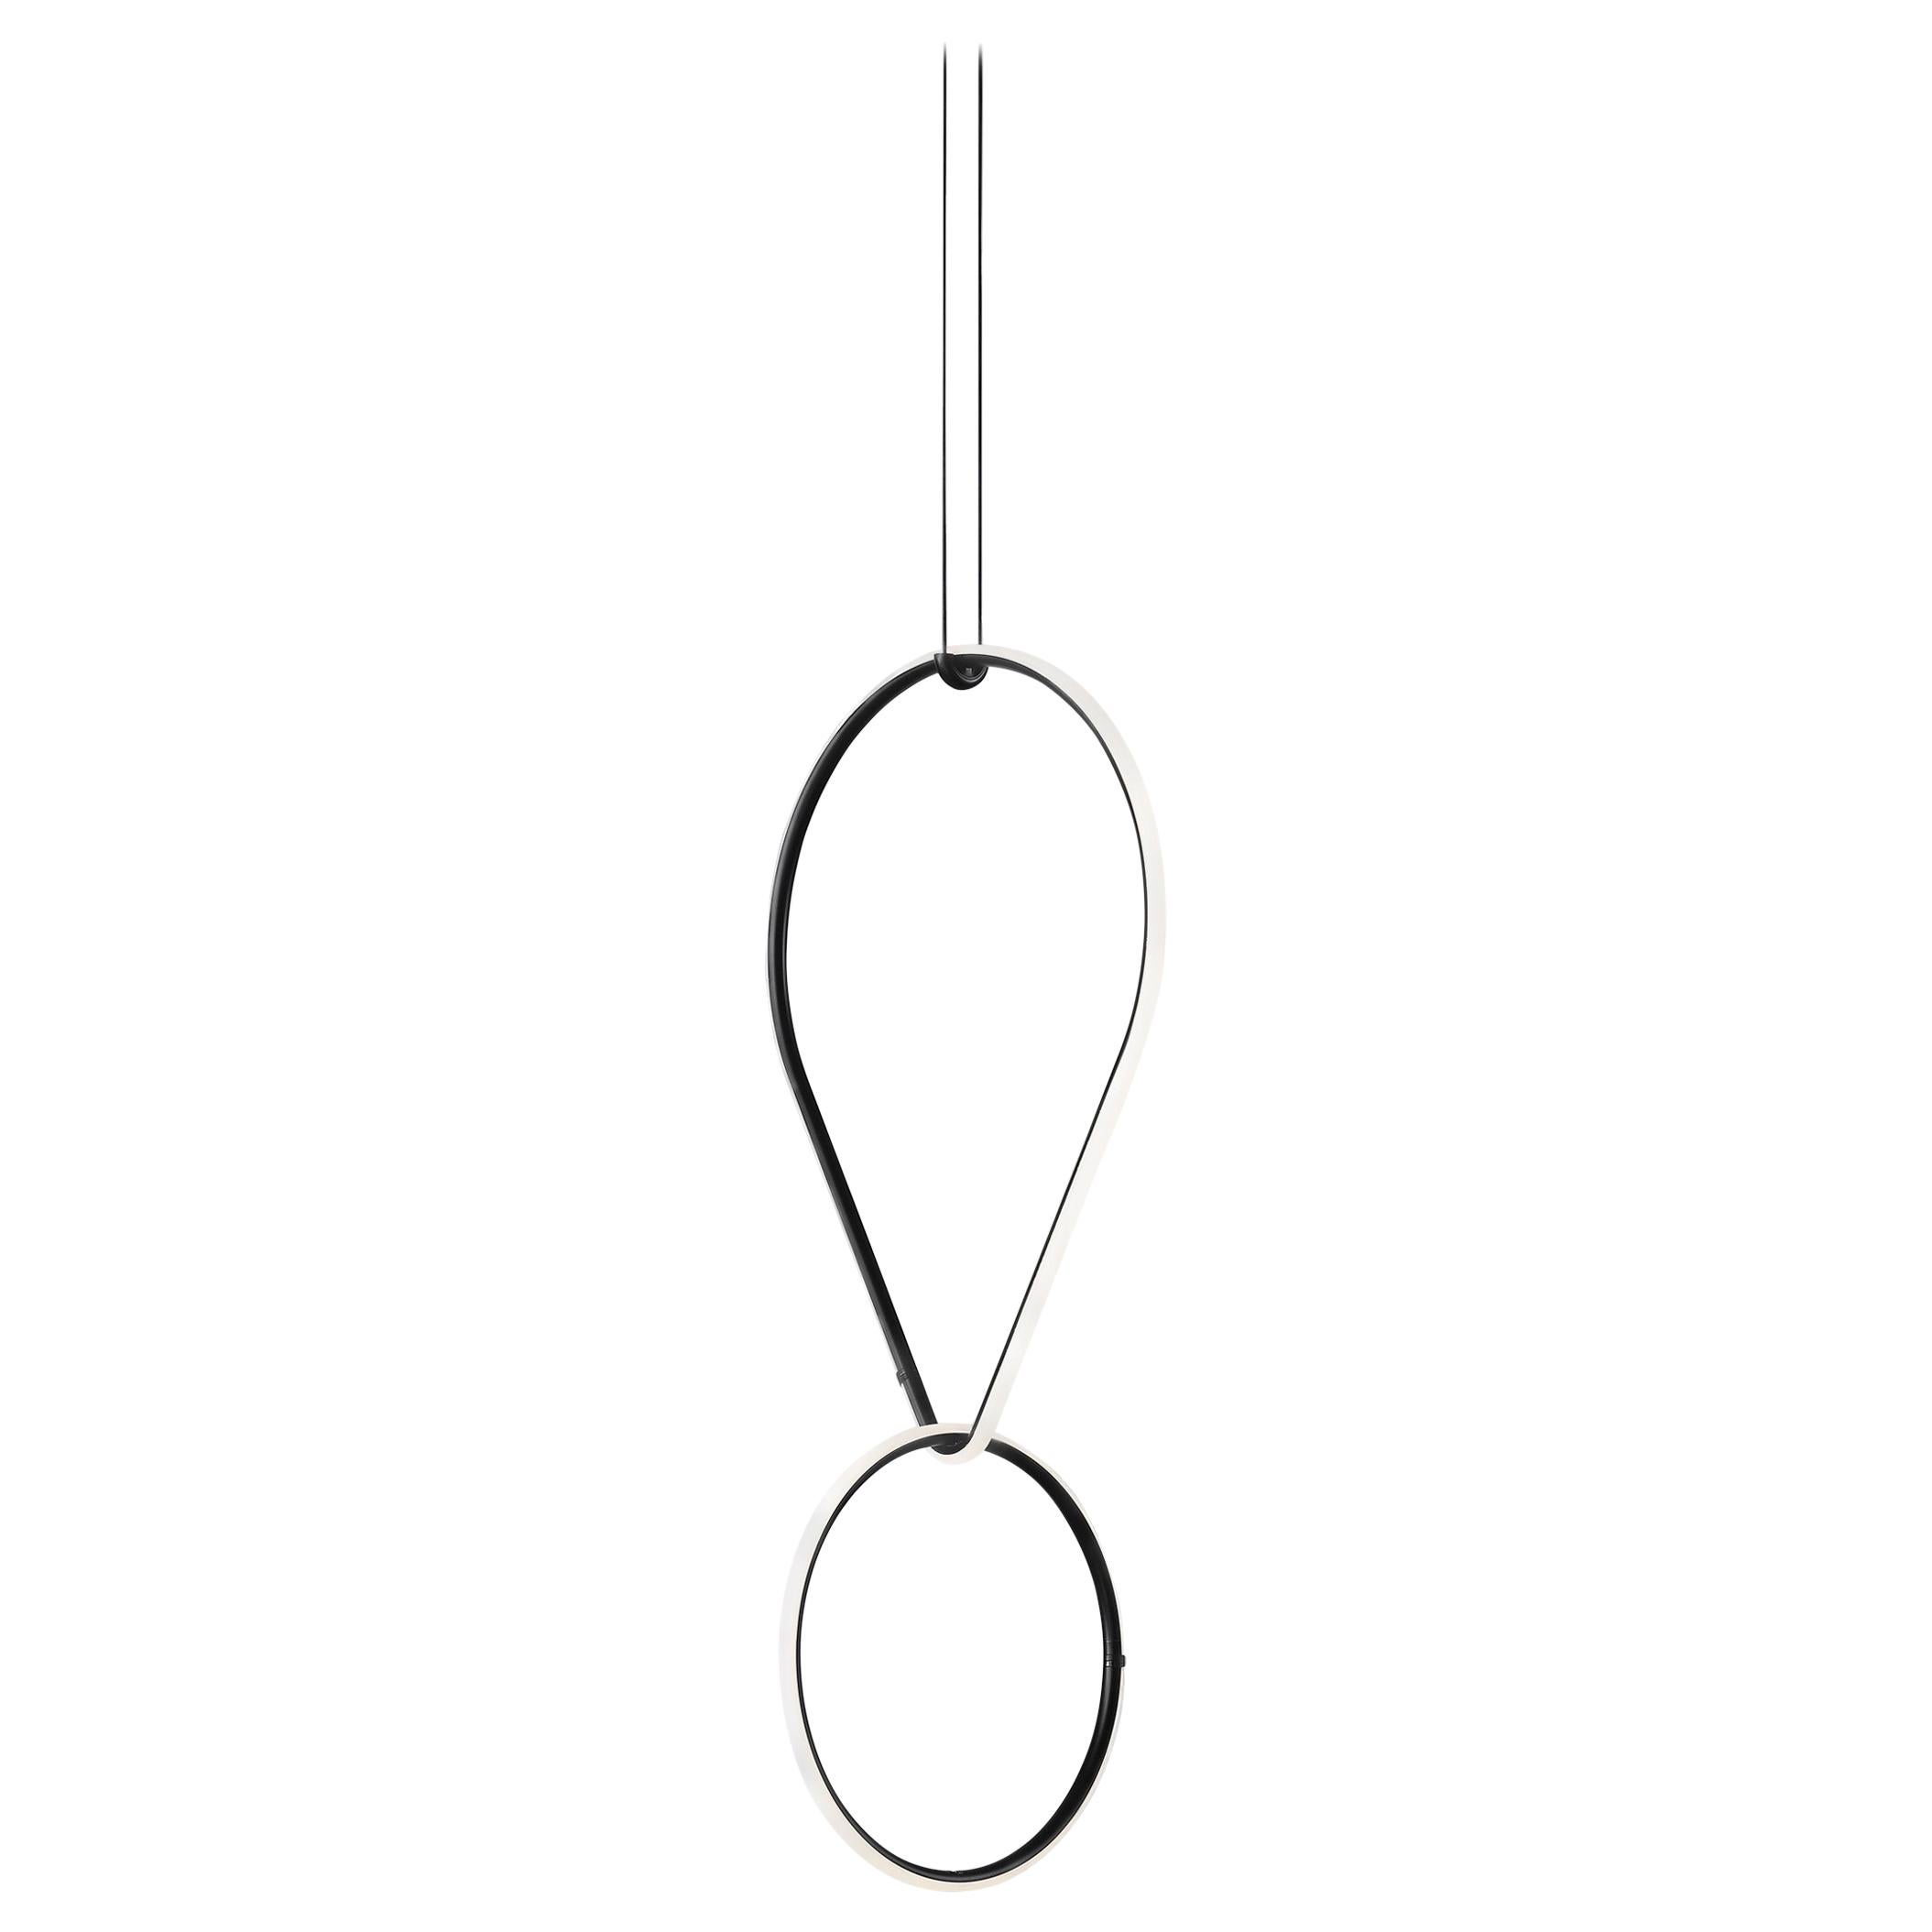 FLOS Drop Down and Small Circle Arrangements Light by Michael Anastassiades